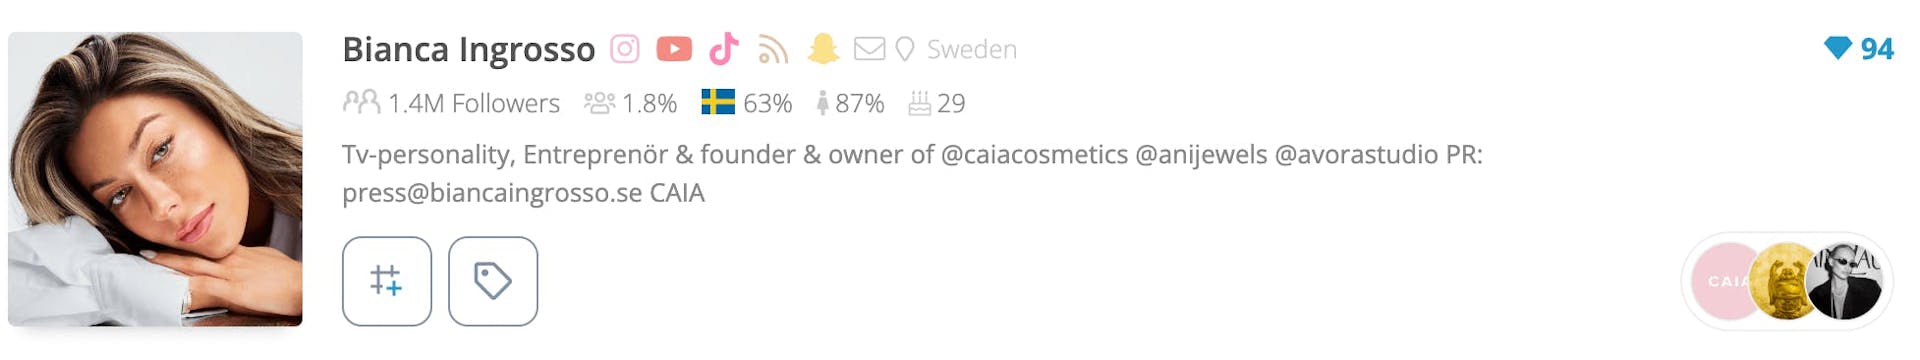 List of the top Swedish influencers: Bianca Ingrosso